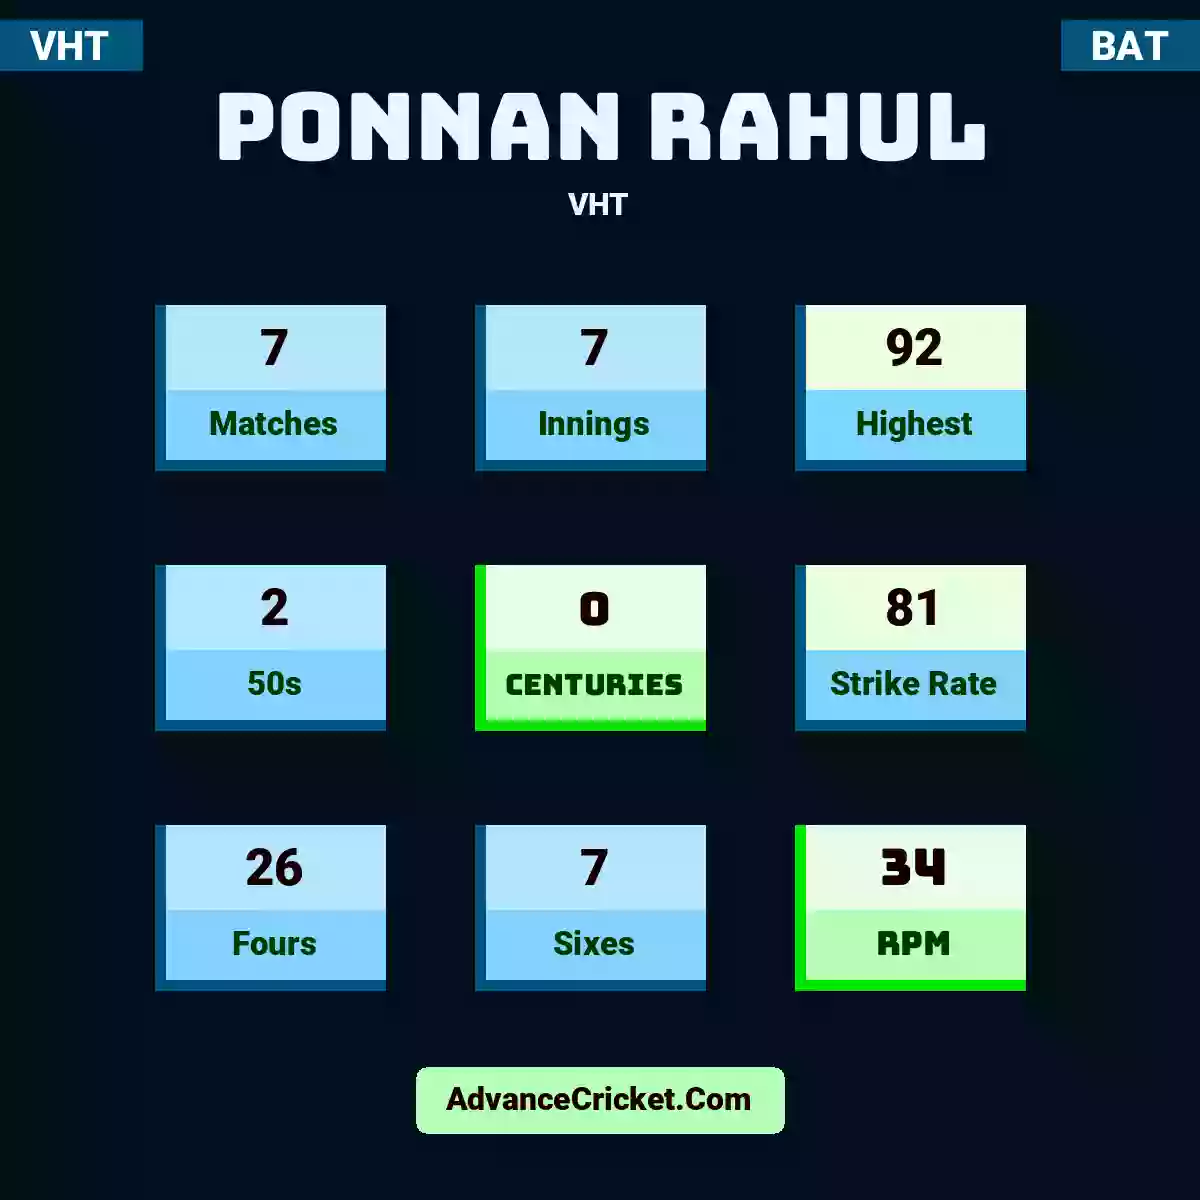 Ponnan Rahul VHT , Ponnan Rahul played 7 matches, scored 92 runs as highest, 2 half-centuries, and 0 centuries, with a strike rate of 81. P.Rahul hit 26 fours and 7 sixes, with an RPM of 34.